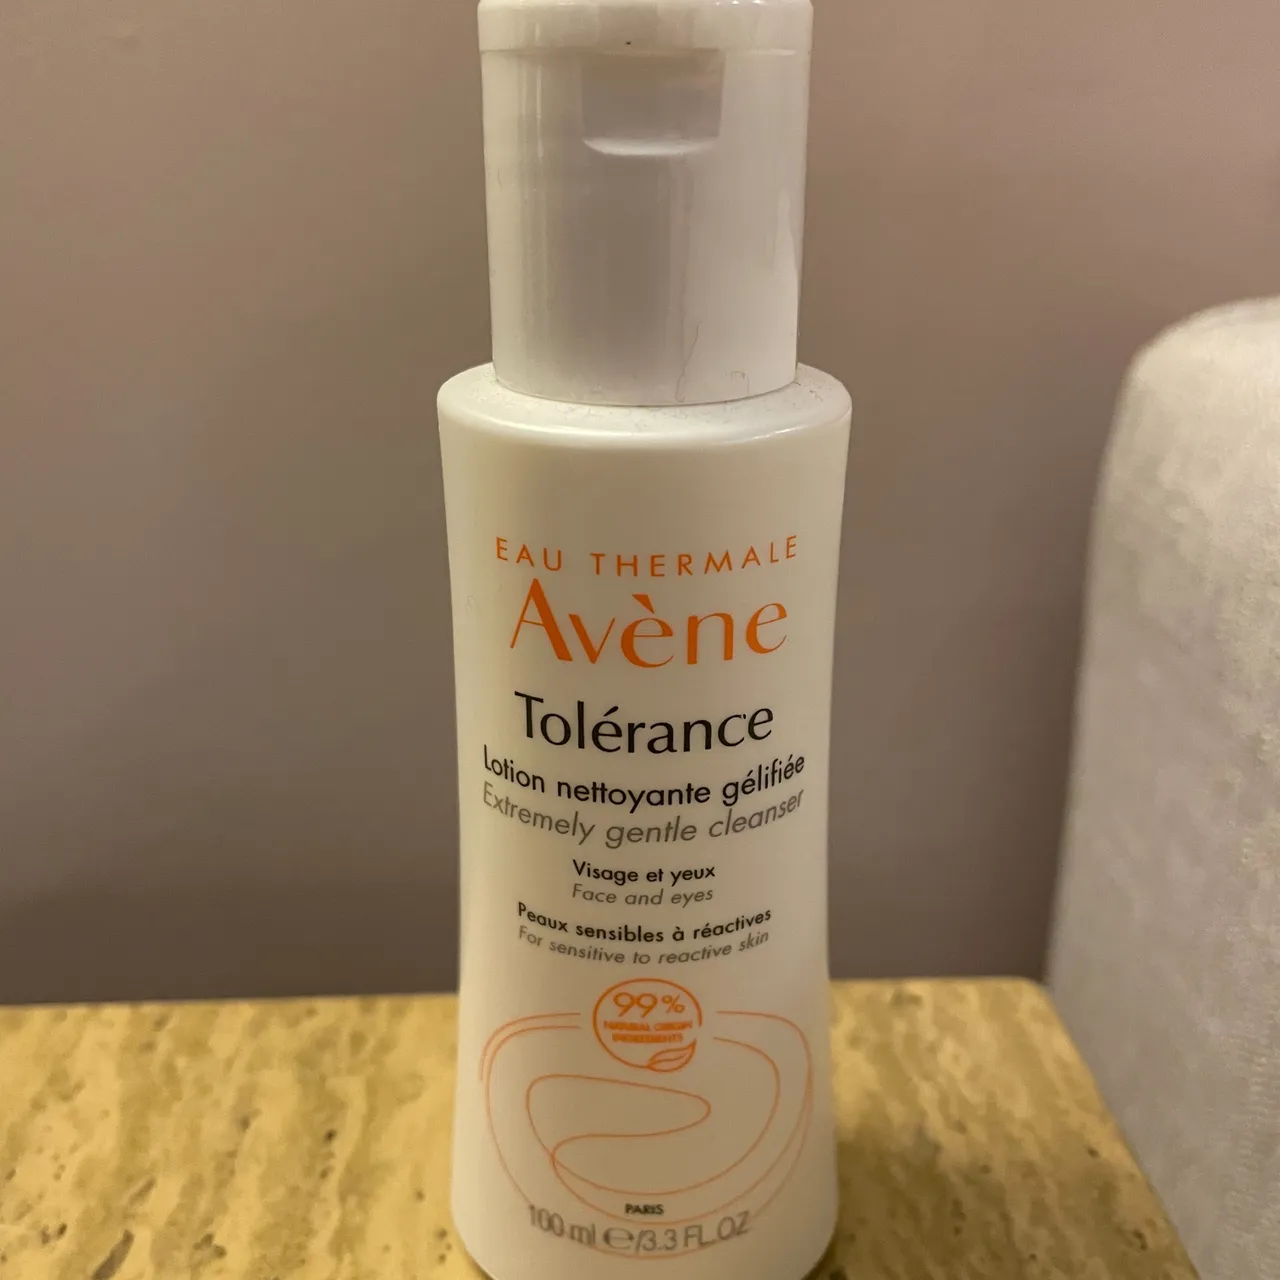 Avène extremely gentle cleanser photo 1